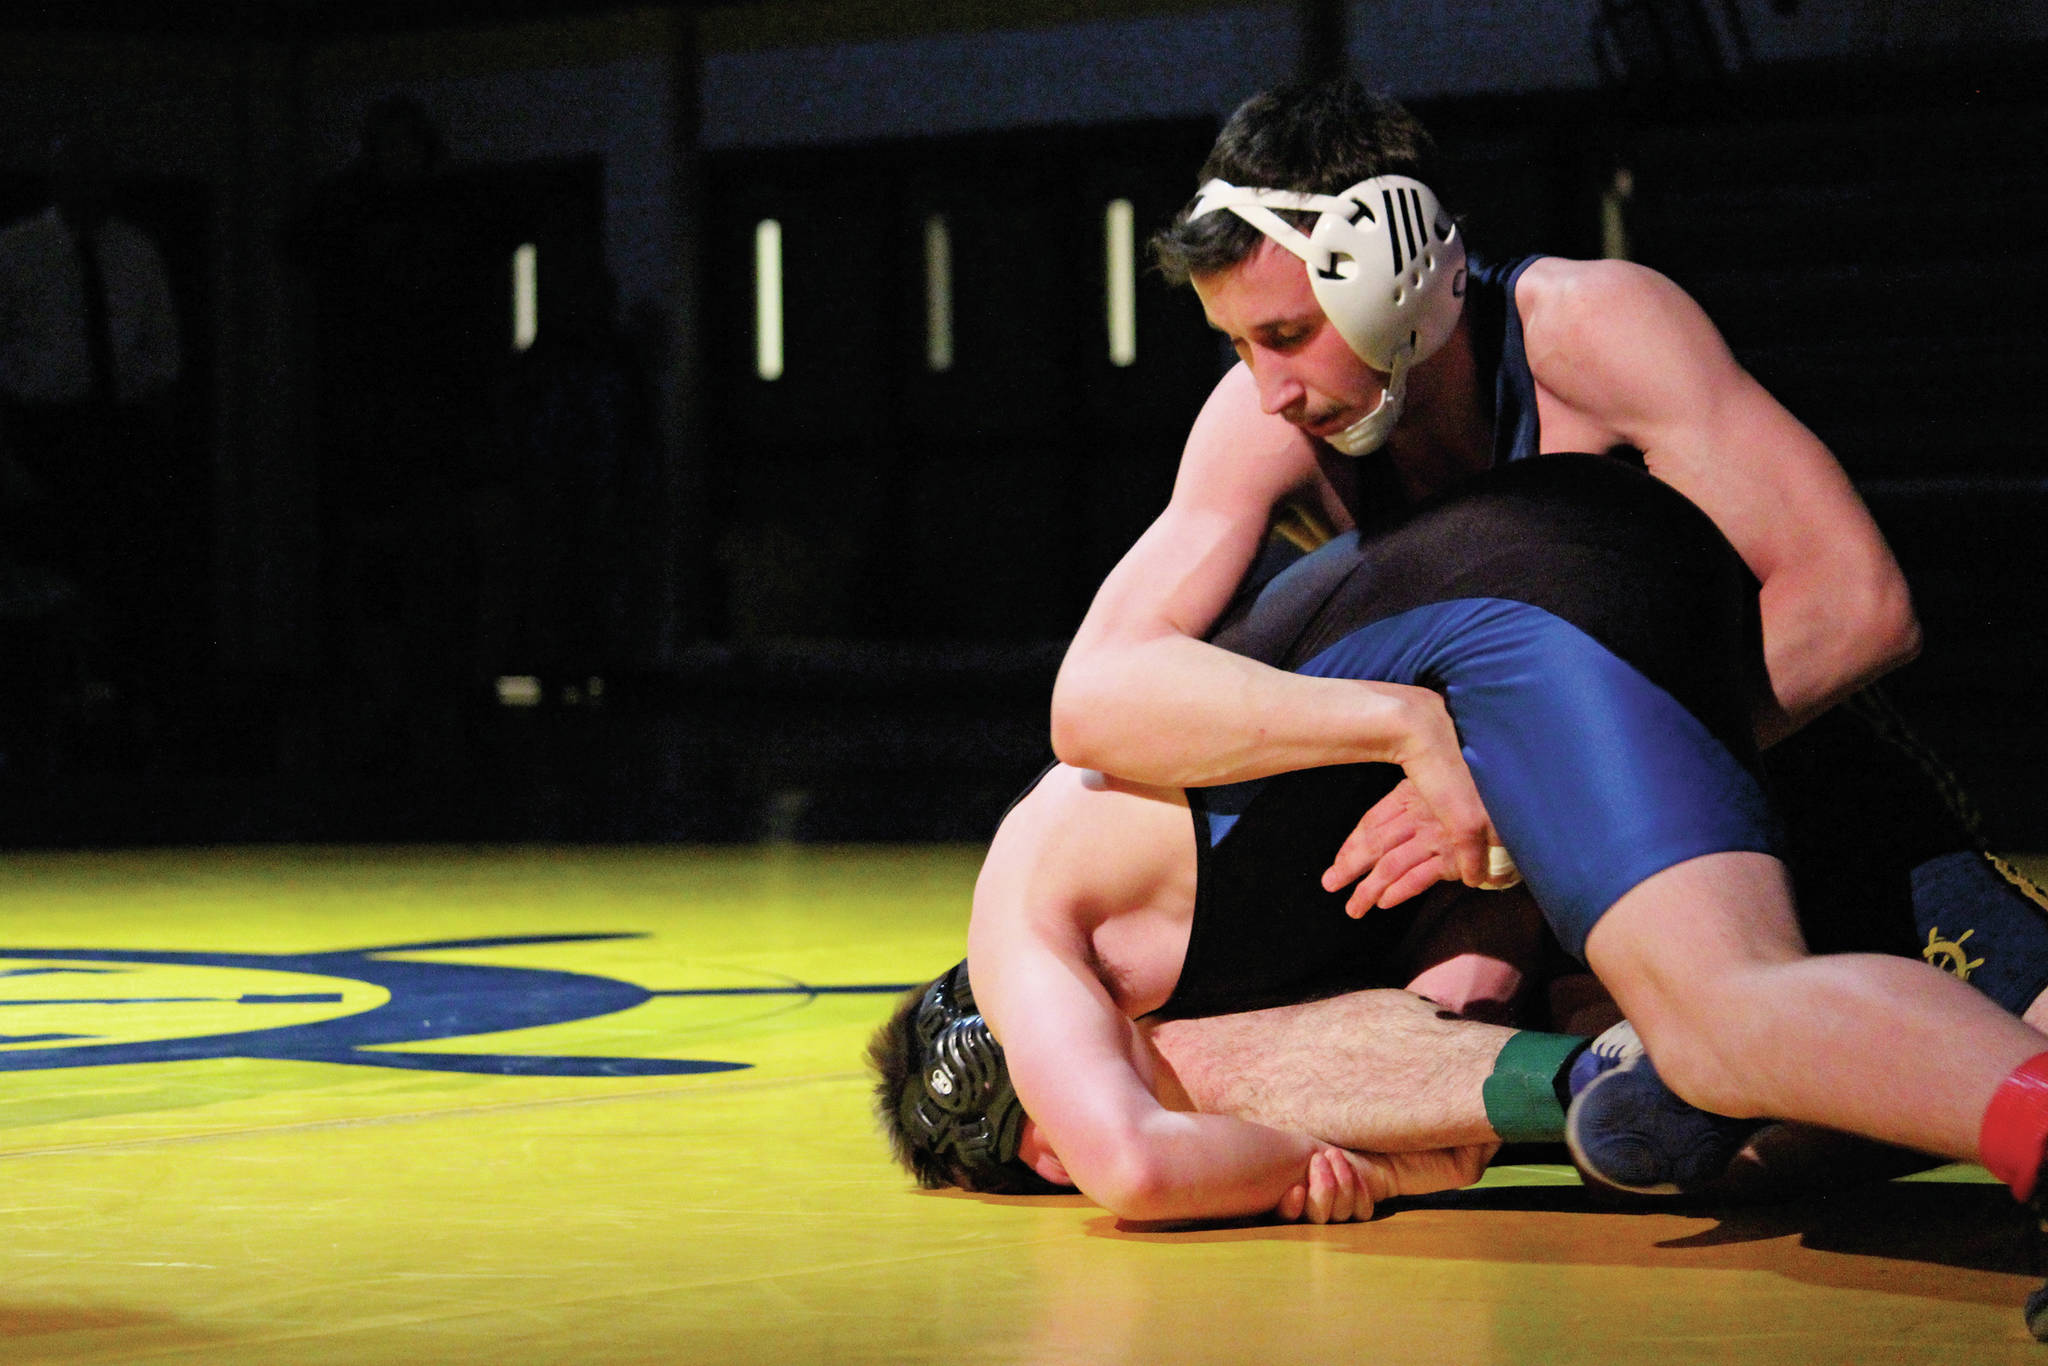 Afony Reutov wrestles with Soldotna’s Zach Burns during a dual wrestling meet between Soldotna and Homer High School on Wednesday, Nov. 27, 2019 at the school in Homer, Alaska. (Photo by Megan Pacer/Homer News)